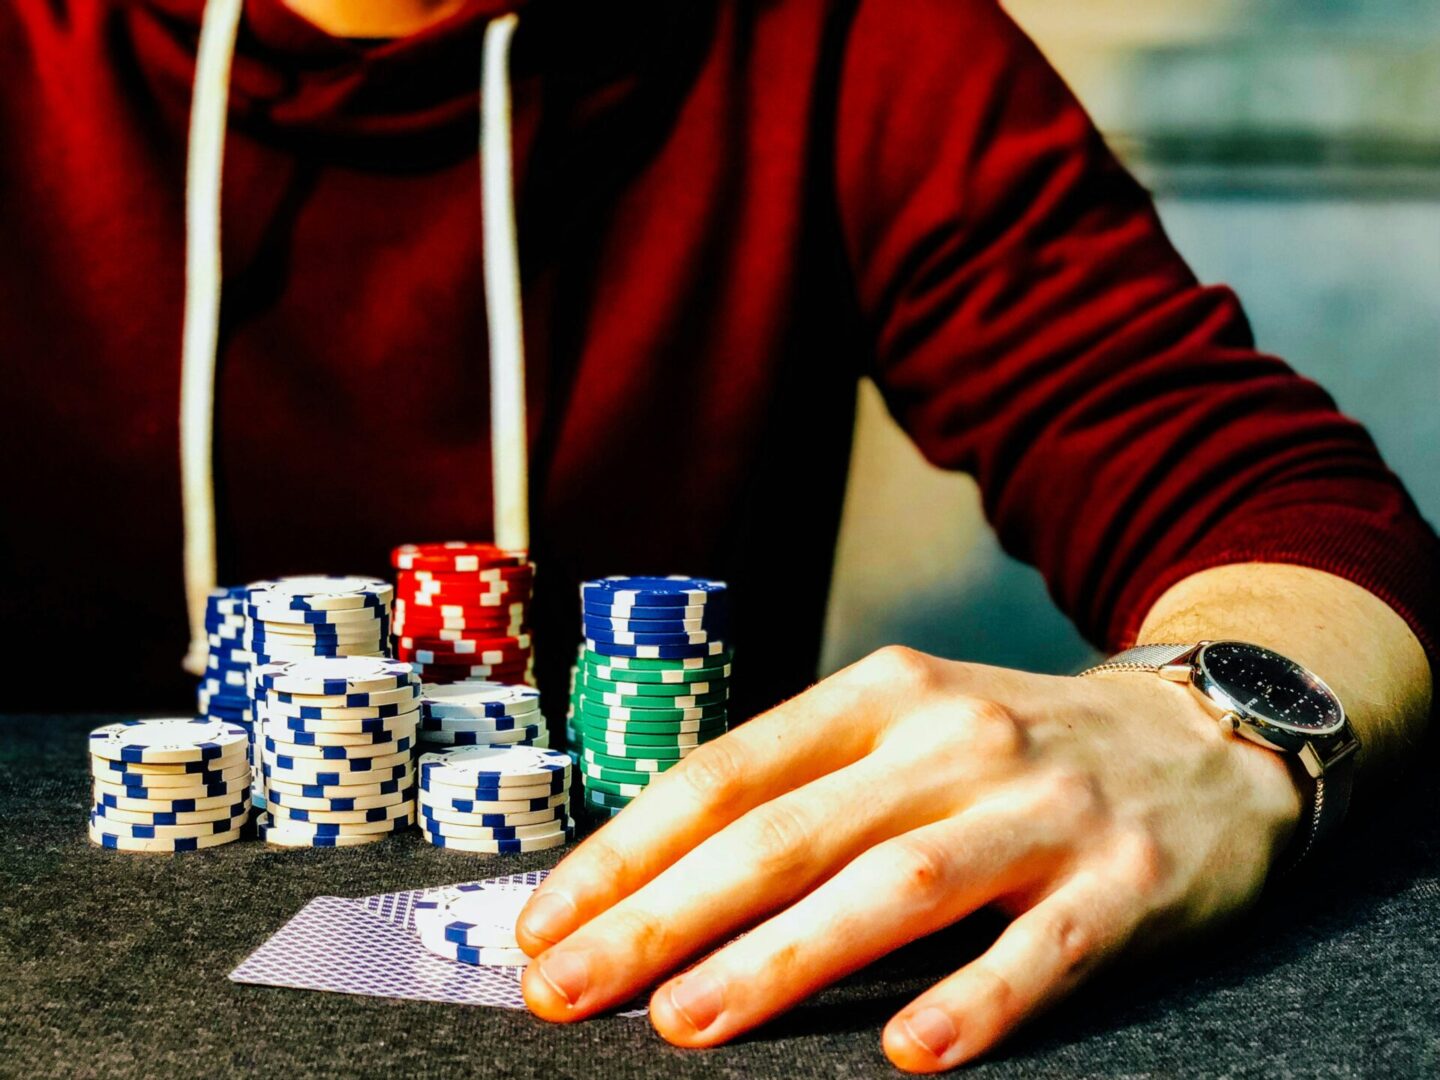 A person playing poker with chips on the table